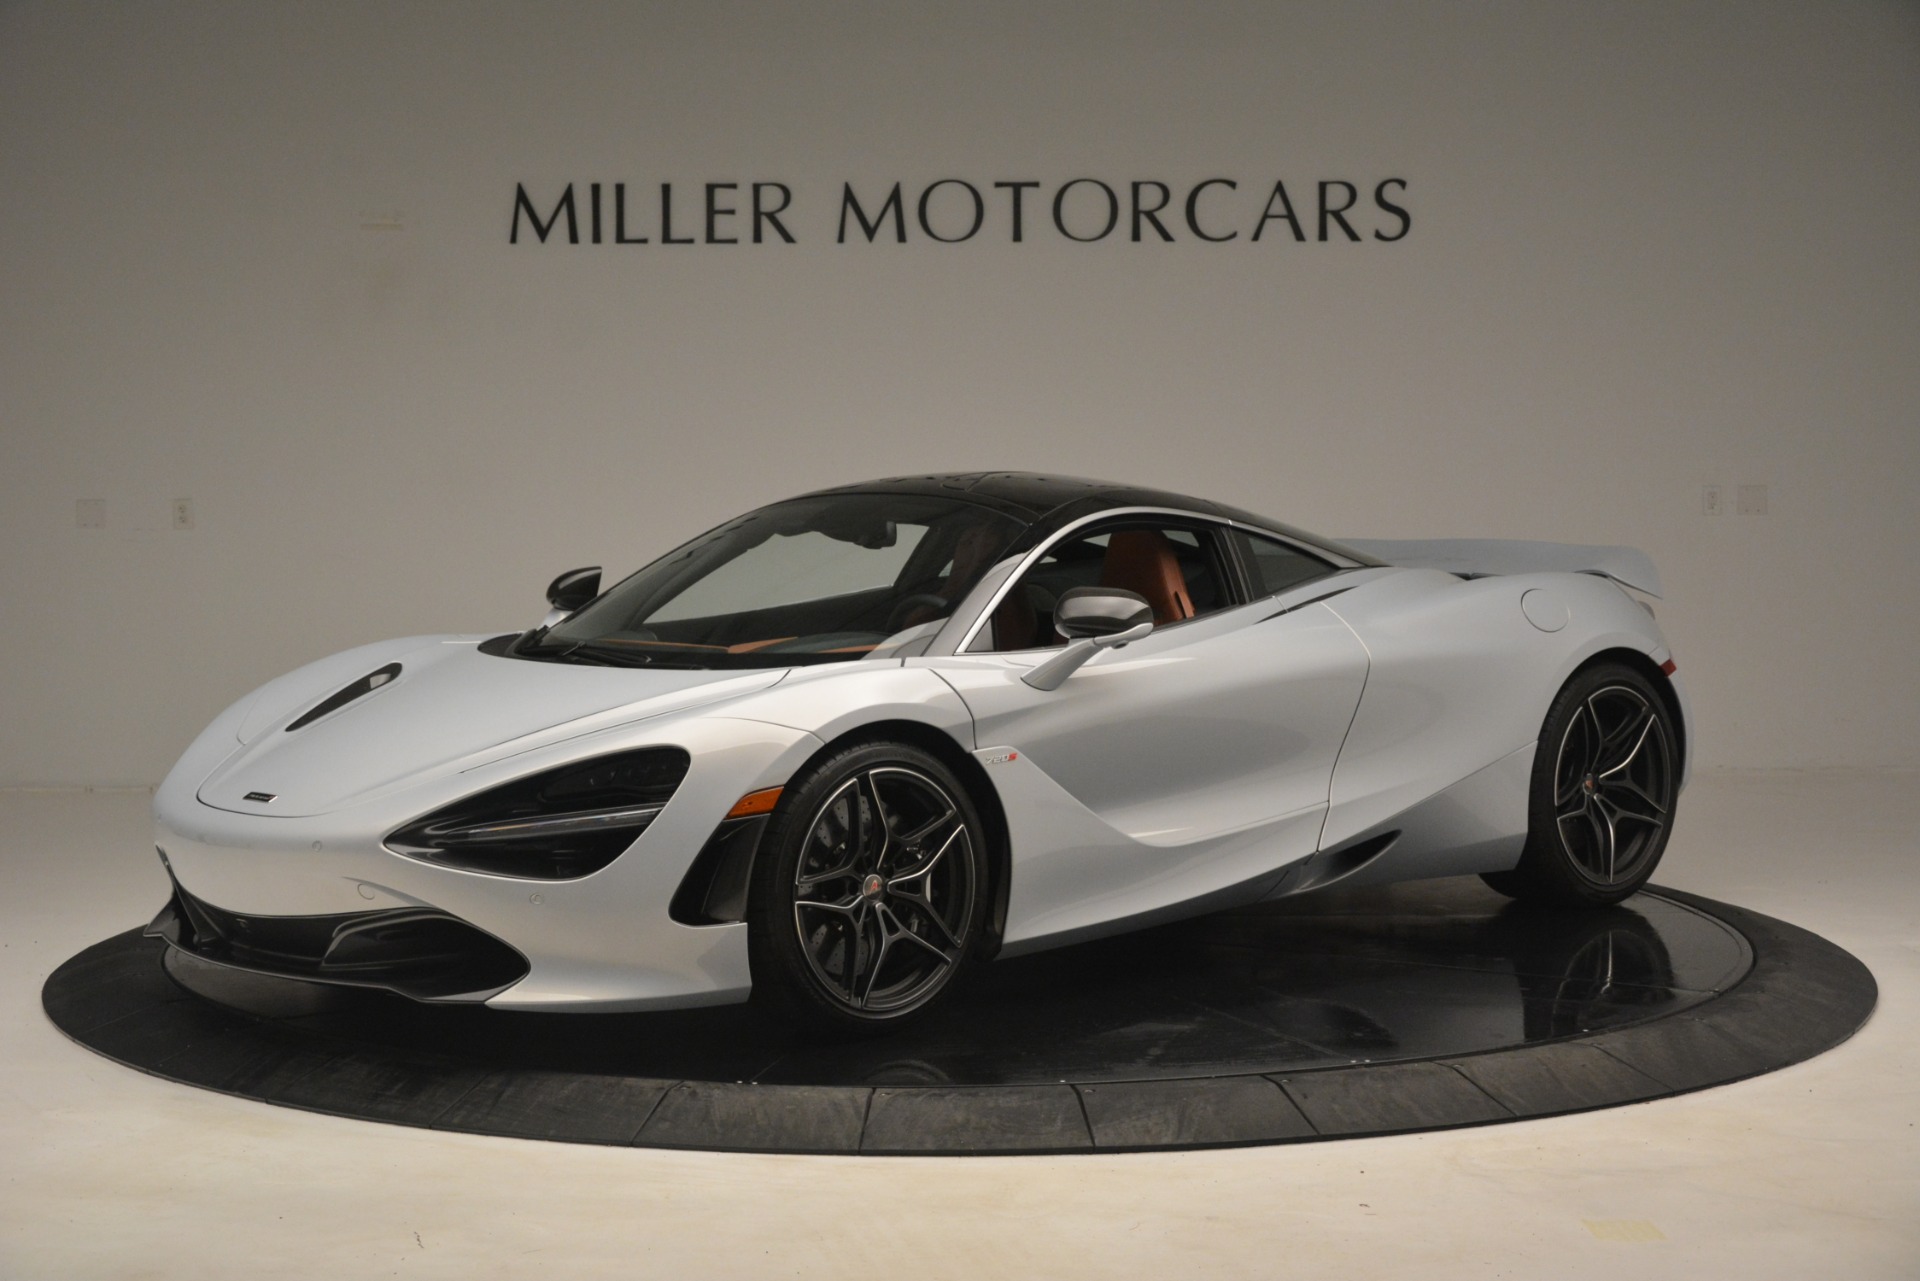 Used 2018 McLaren 720S Coupe for sale Sold at McLaren Greenwich in Greenwich CT 06830 1